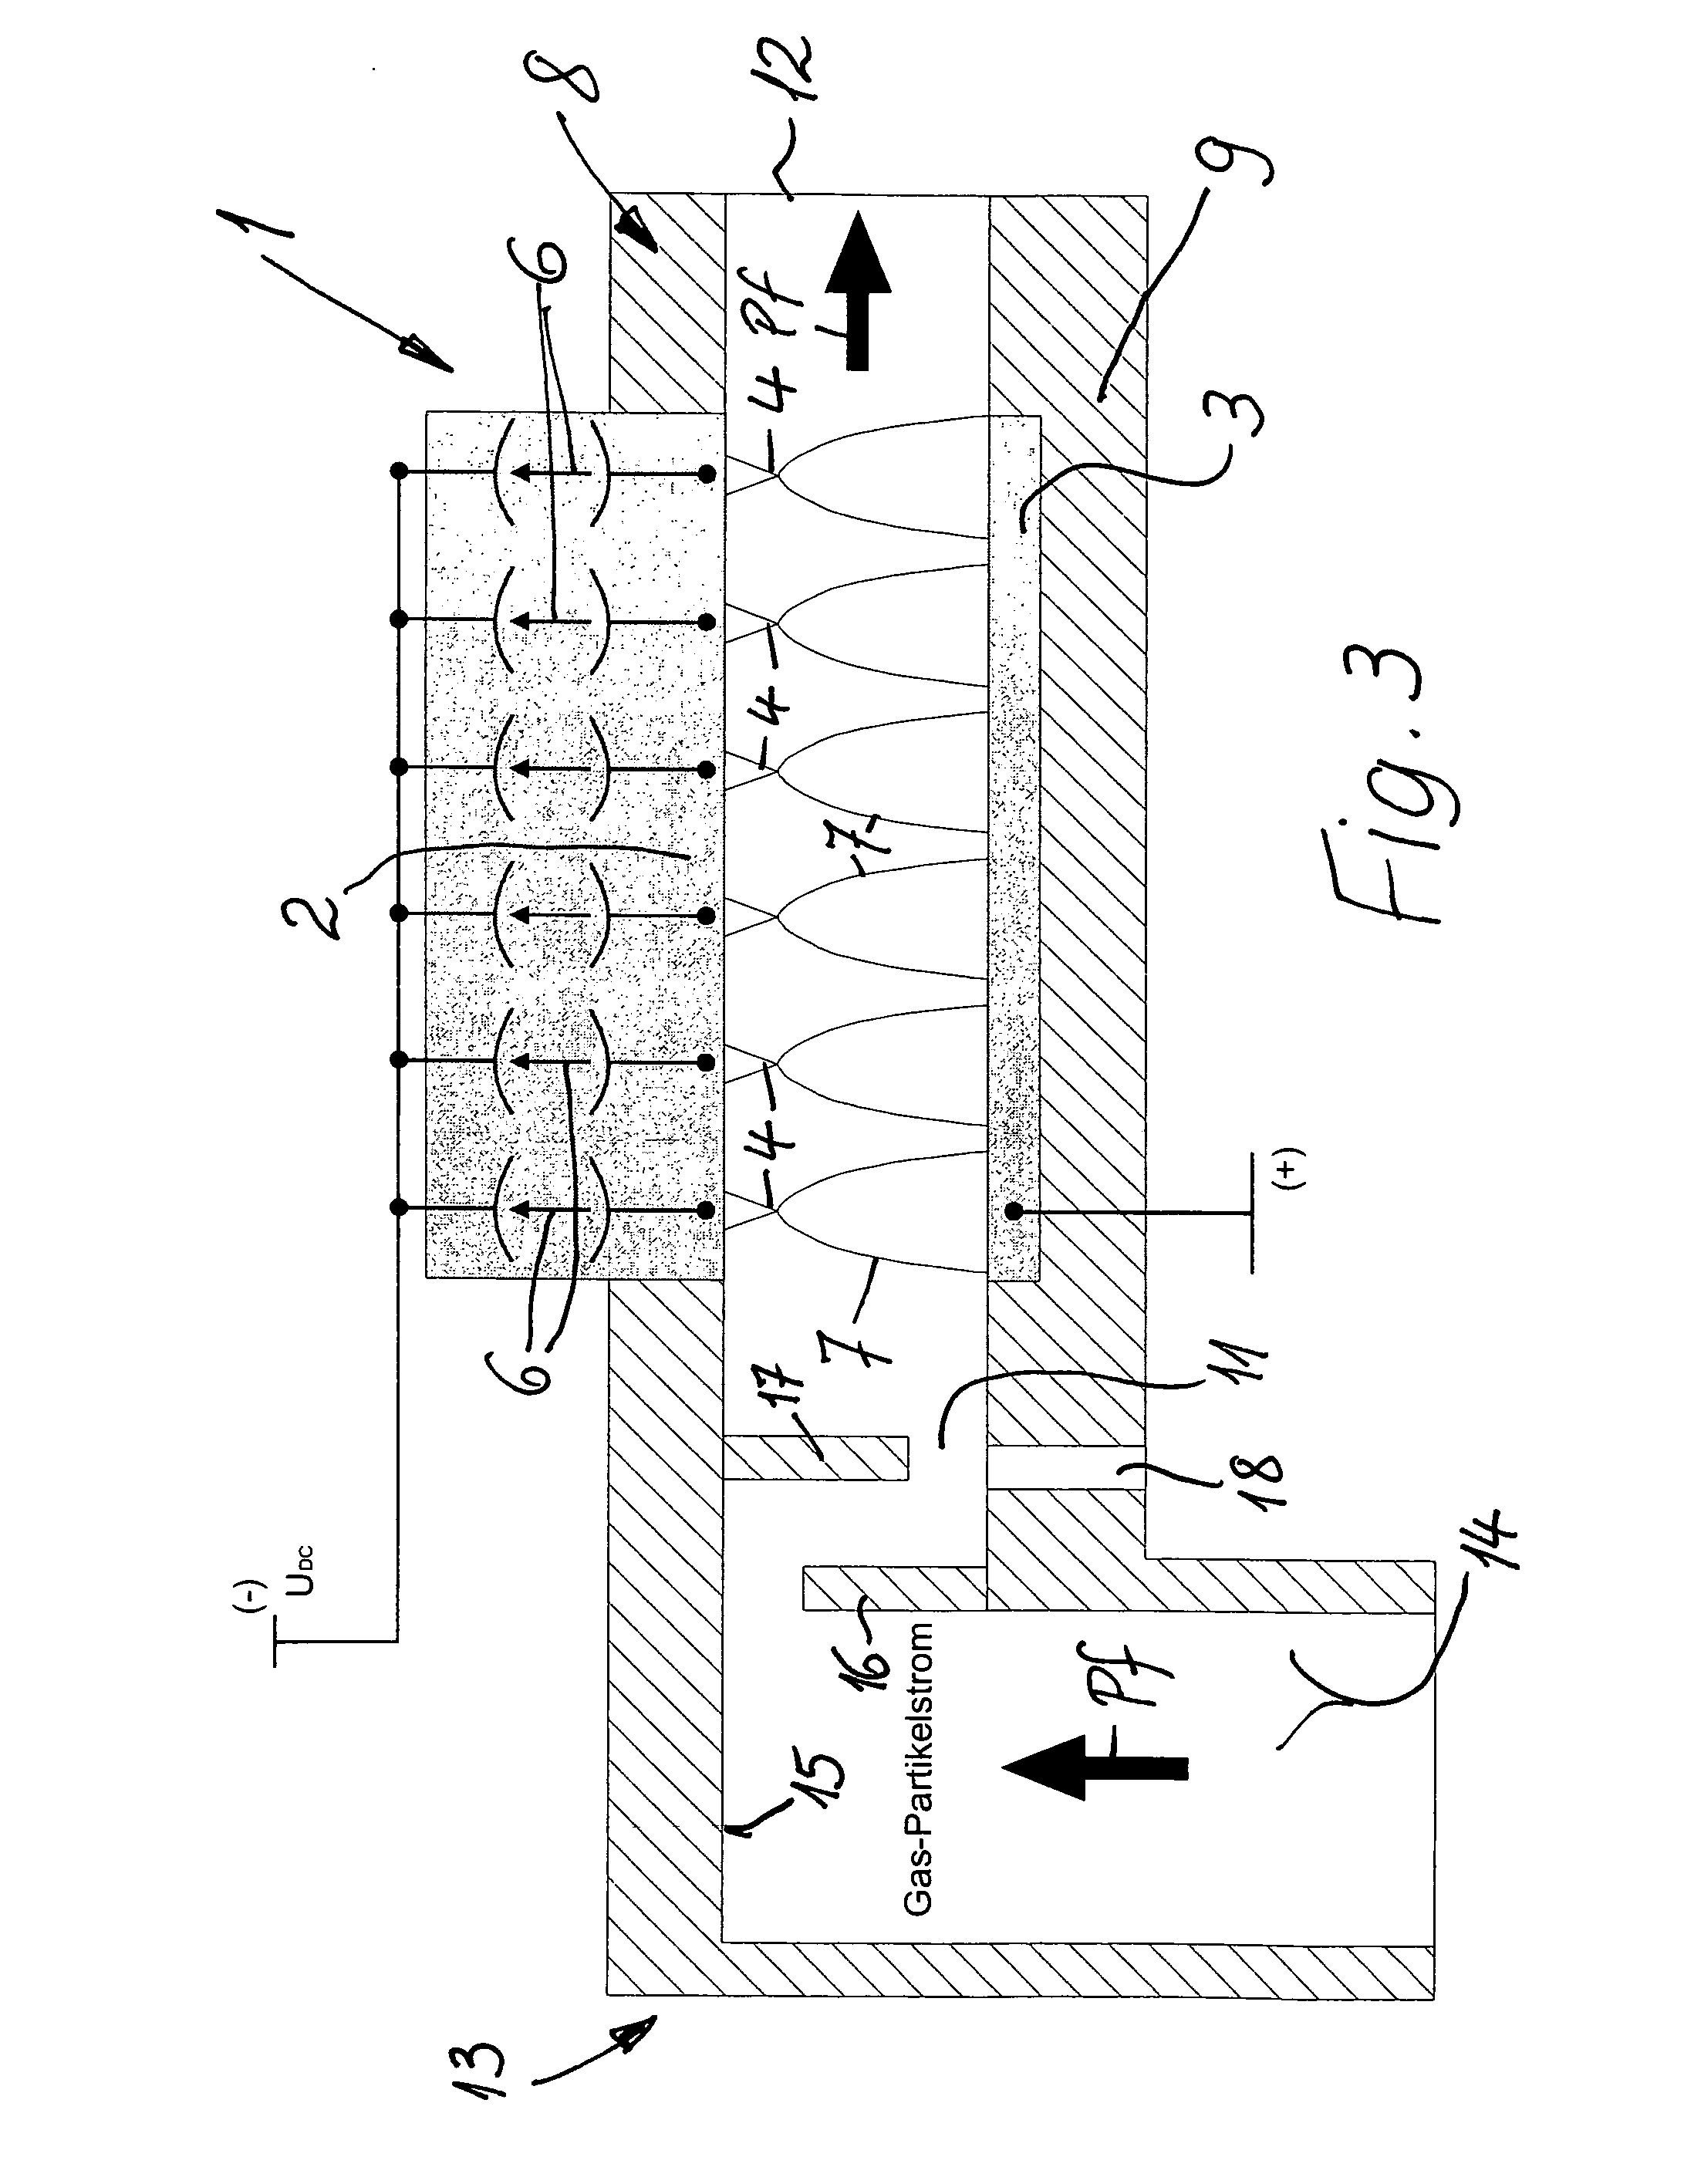 Method and device for precipitating impurities from a stream of gas